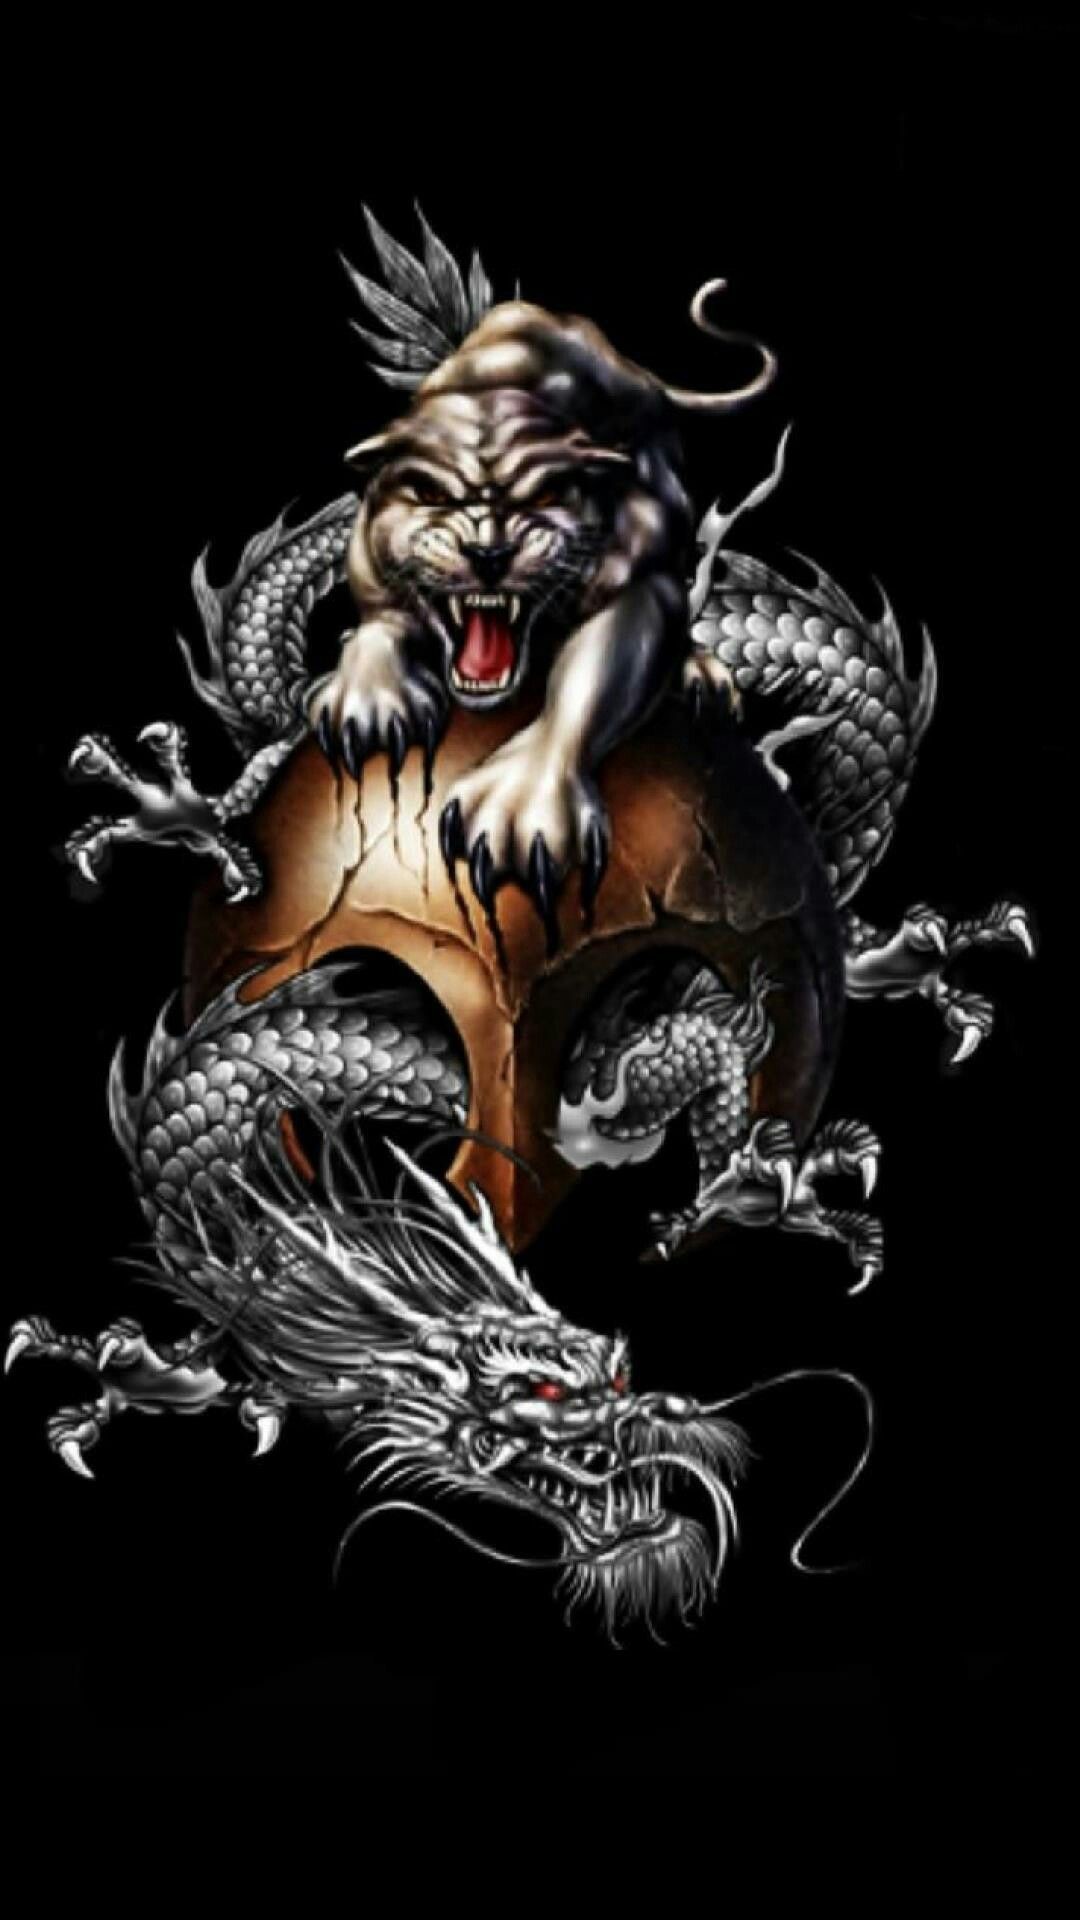 1080x1920  Skull, Tiger and a dragon | Tigers | Pinterest | Tigers, Dragons  and